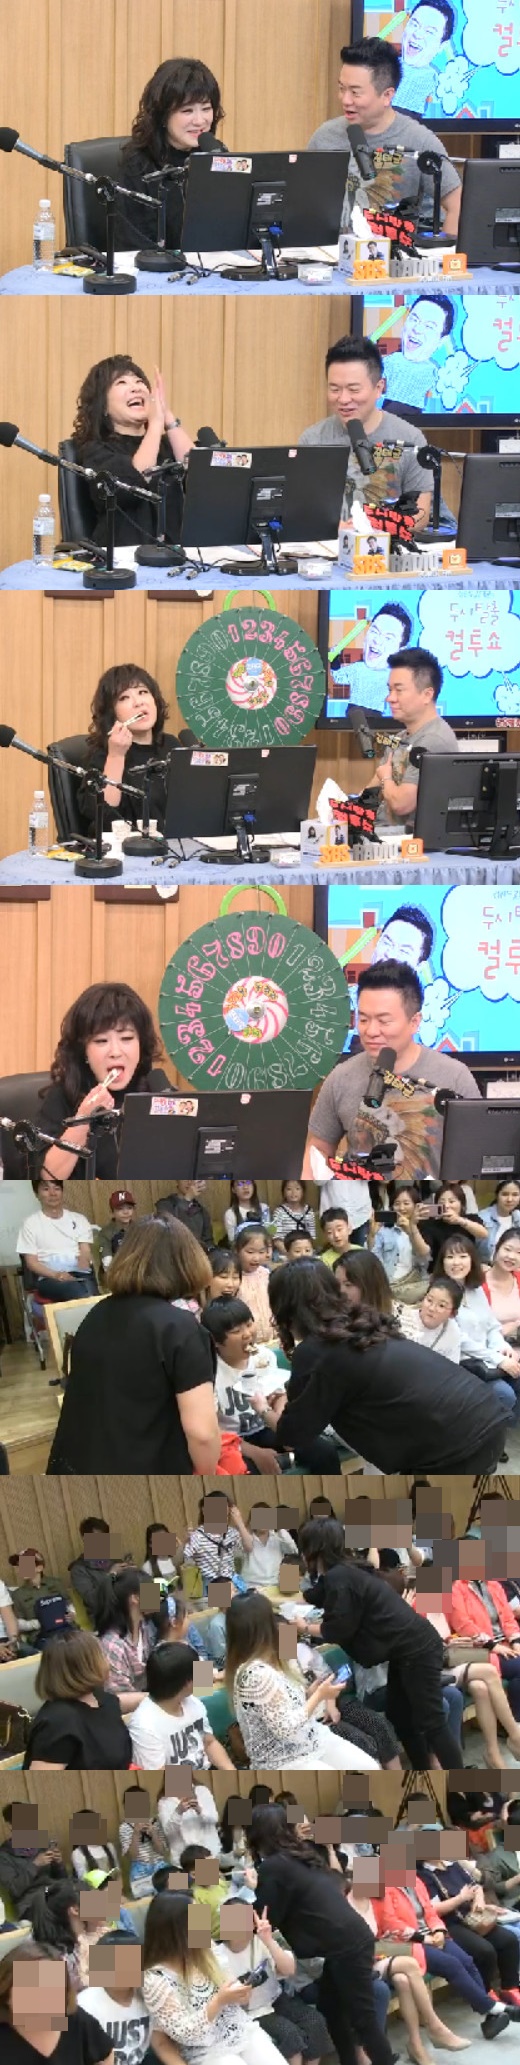 Singer Noh Sa-yeon received the TV Cultwo Show with his extraordinary affinity and gesture. On SBS Power FM Dooshi Escape TV Cultwo Show (hereinafter referred to as TV Cultwo Show), Noh Sa-yeon became a special DJ.Noh Sa-yeon said, I have been feeling popular recently. I have been debuting for 40 years, and it is also recently that young friends like me in 40 years.I will take a picture and I will. Noh Sa-yeons recent popularity is due to its cool personality and dedication.Especially, the appearance of being honest and caring for others, the tit-for-tat and sweetness of her husband James Moosong Lee, caused the publics favor. Noh Sa-yeon was also honest about flesh.I just do not want to lose weight, I have only bones left, said DJ Kim Tae-gyun, who asked, Did you declare that you do not lose weight?I feel so good, he said. I am dry now and if I fall further than this, people ask me, Do you have a party? Its all bones.I did not have any flesh, he said. In the past, MBC Golden Fishery - Radio Star said that Kang Susie should be removed. Kang Susie said, I had so many male fans that he hated him.In my heart, Im really saying, I have to get rid of him.I was going to go to that place a little bit, but I have passed by and now I am a very pretty brother.  So I am talking comfortably. My husband James Moosong Lee and JTBC I also conveyed an anecdote. (James Moosong Lee) recently took an advert for the Ministry of Health and Welfare.James Moosong Lee is a slave, said James Moosong Lee, who parodied Bobs pretty sister, and said, The most impressive scene is the stall scene. I thought people were shooting a beautiful sister who bought rice well. The most eye-catching thing on the spot that was transmitted through the radio on this day was the figure of Noh Sa-yeon eating Chicken.For Noh Sa-yeon, who is in poor condition, the production team prepared Chicken and showed Chicken food in real time.Chicken continued to refill in front of Noh Sa-yeon, adding to the fun of listening and watching.